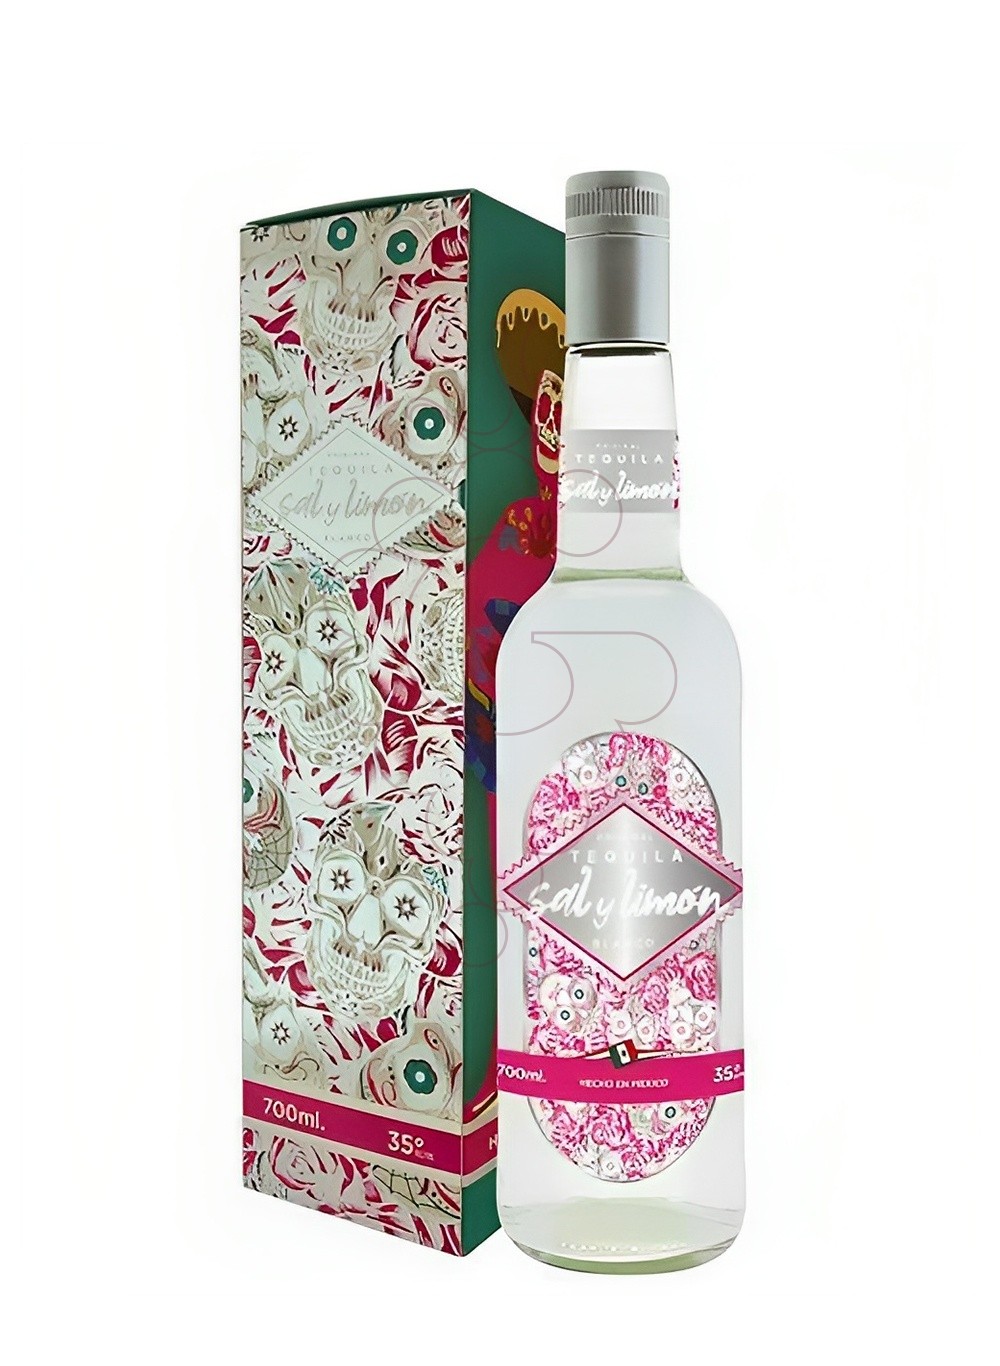 Photo Tequila Tequila sal i limon blanc 70cl